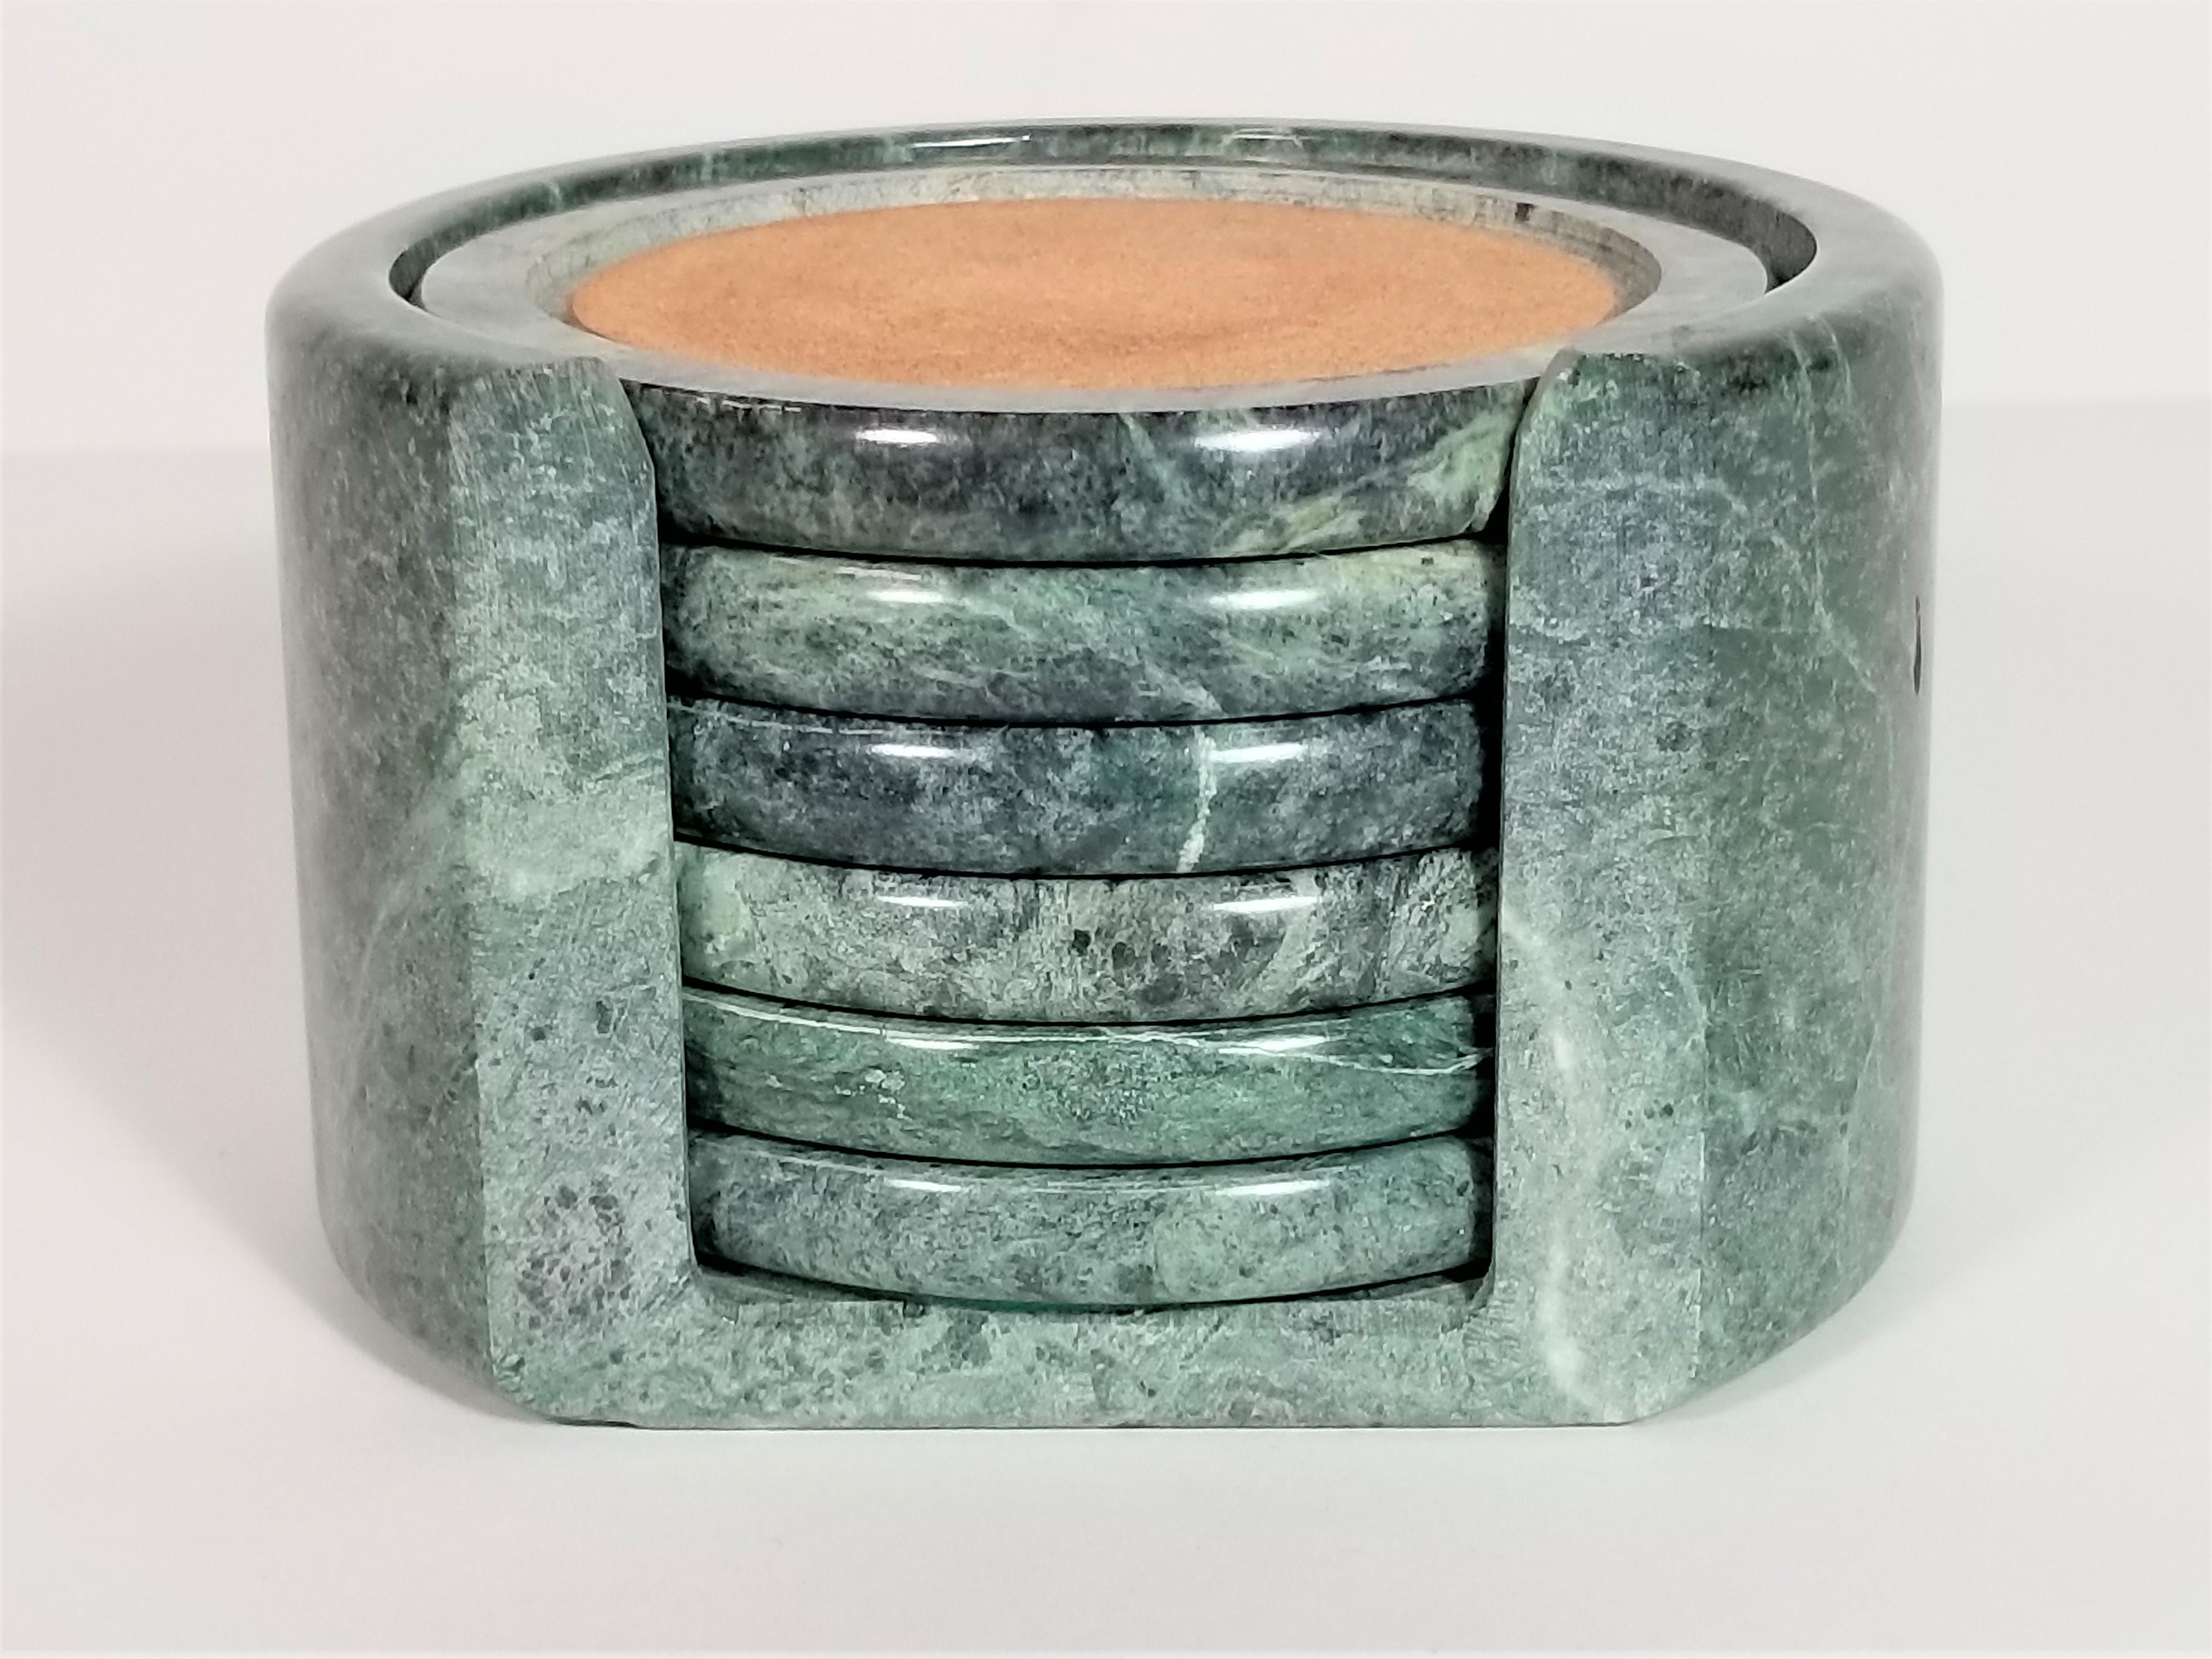 1980s midcentury green marble coasters. 7 piece set includes 6 coasters and 1 marble holder. Green Felt on bottom of all coasters and holder to protect surface.
Excellent condition
Measurements:
Holder height 3.0 inches
Holder diameter 4.75